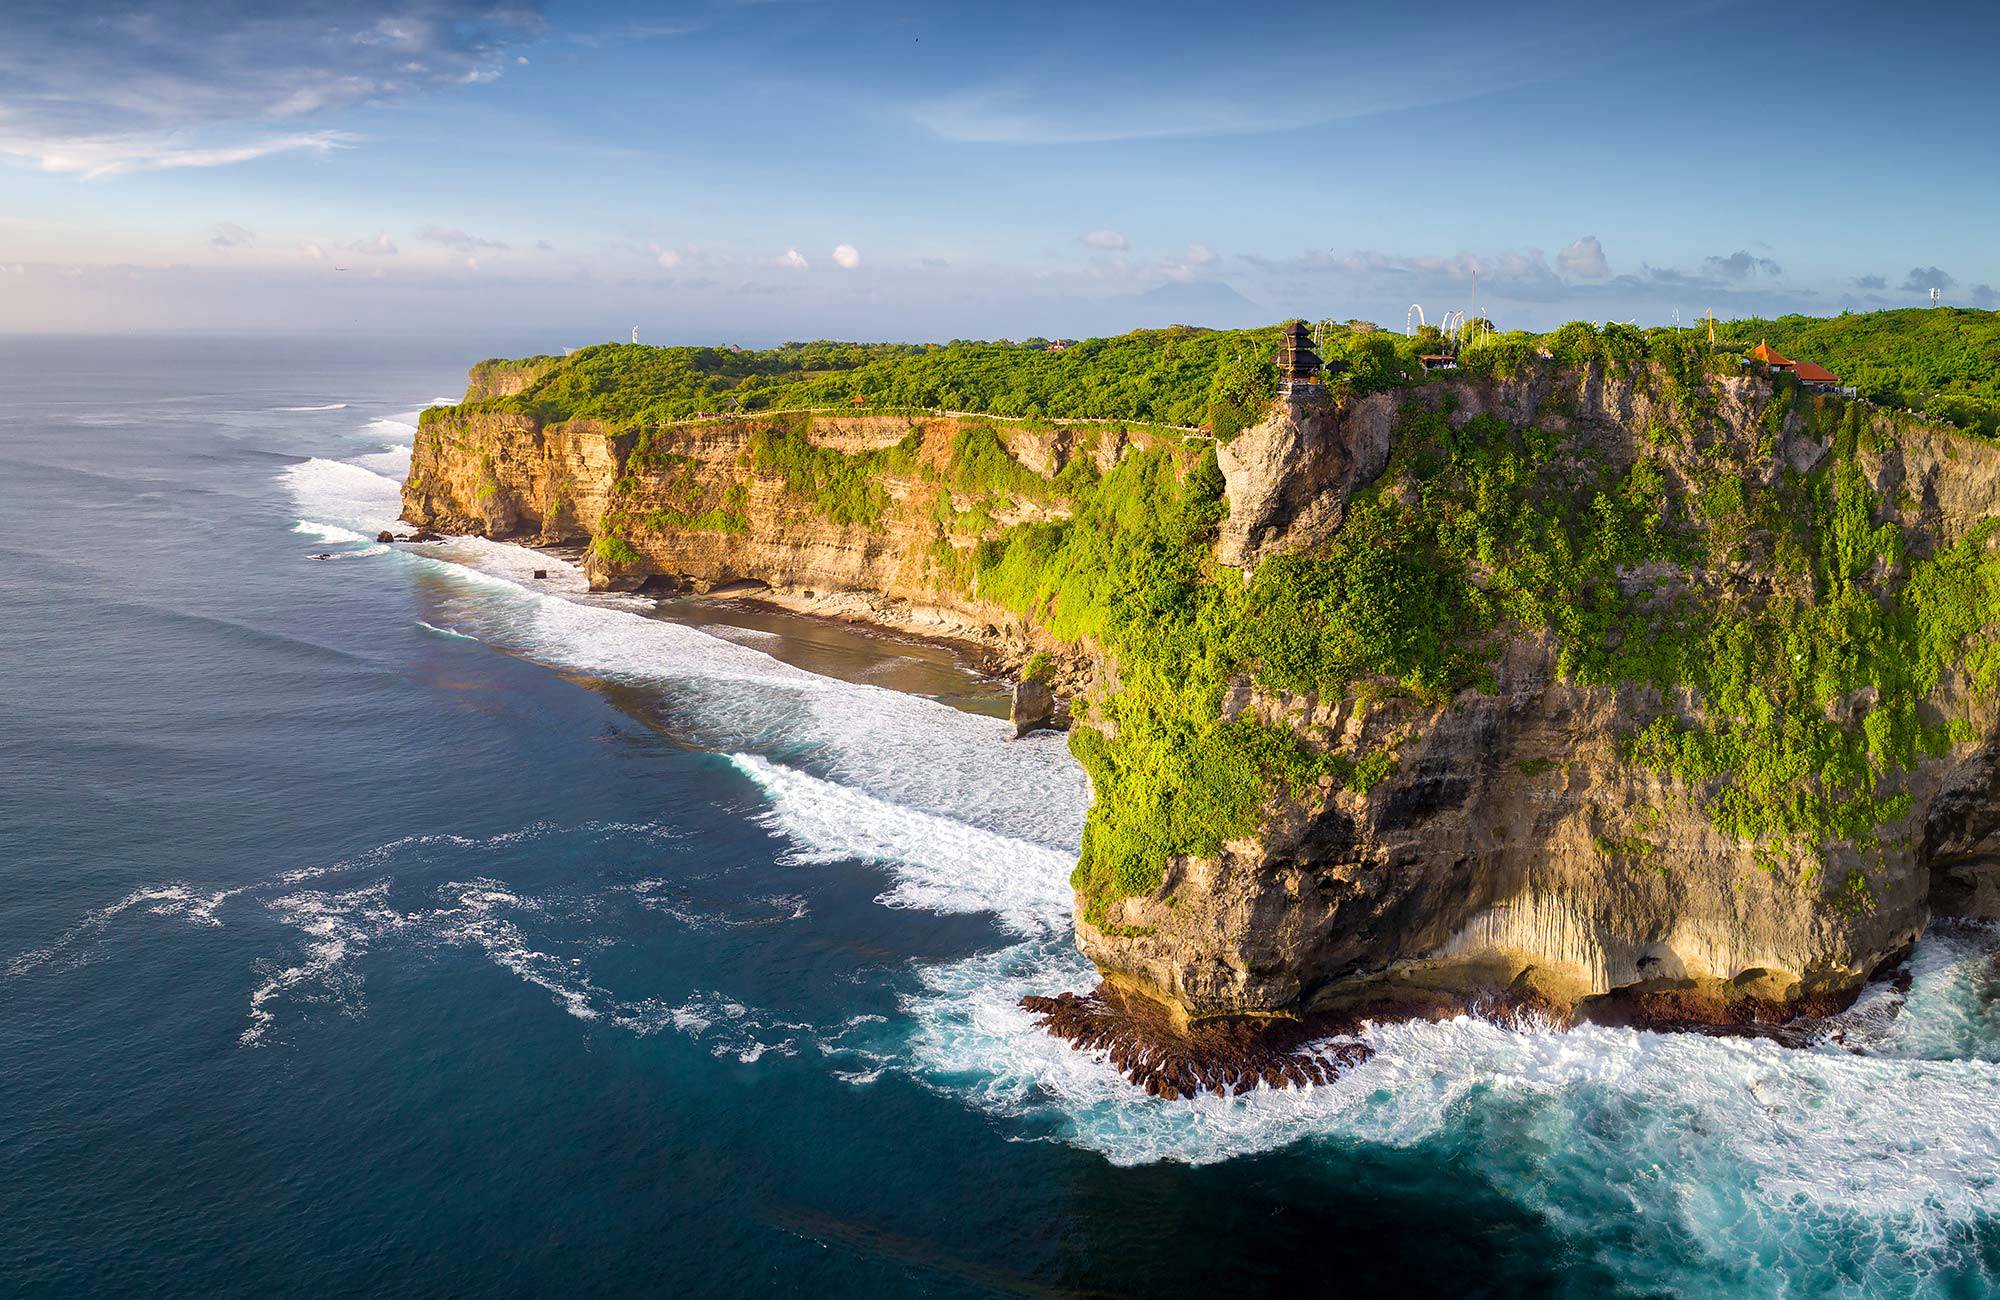 bali's nature is outstanding